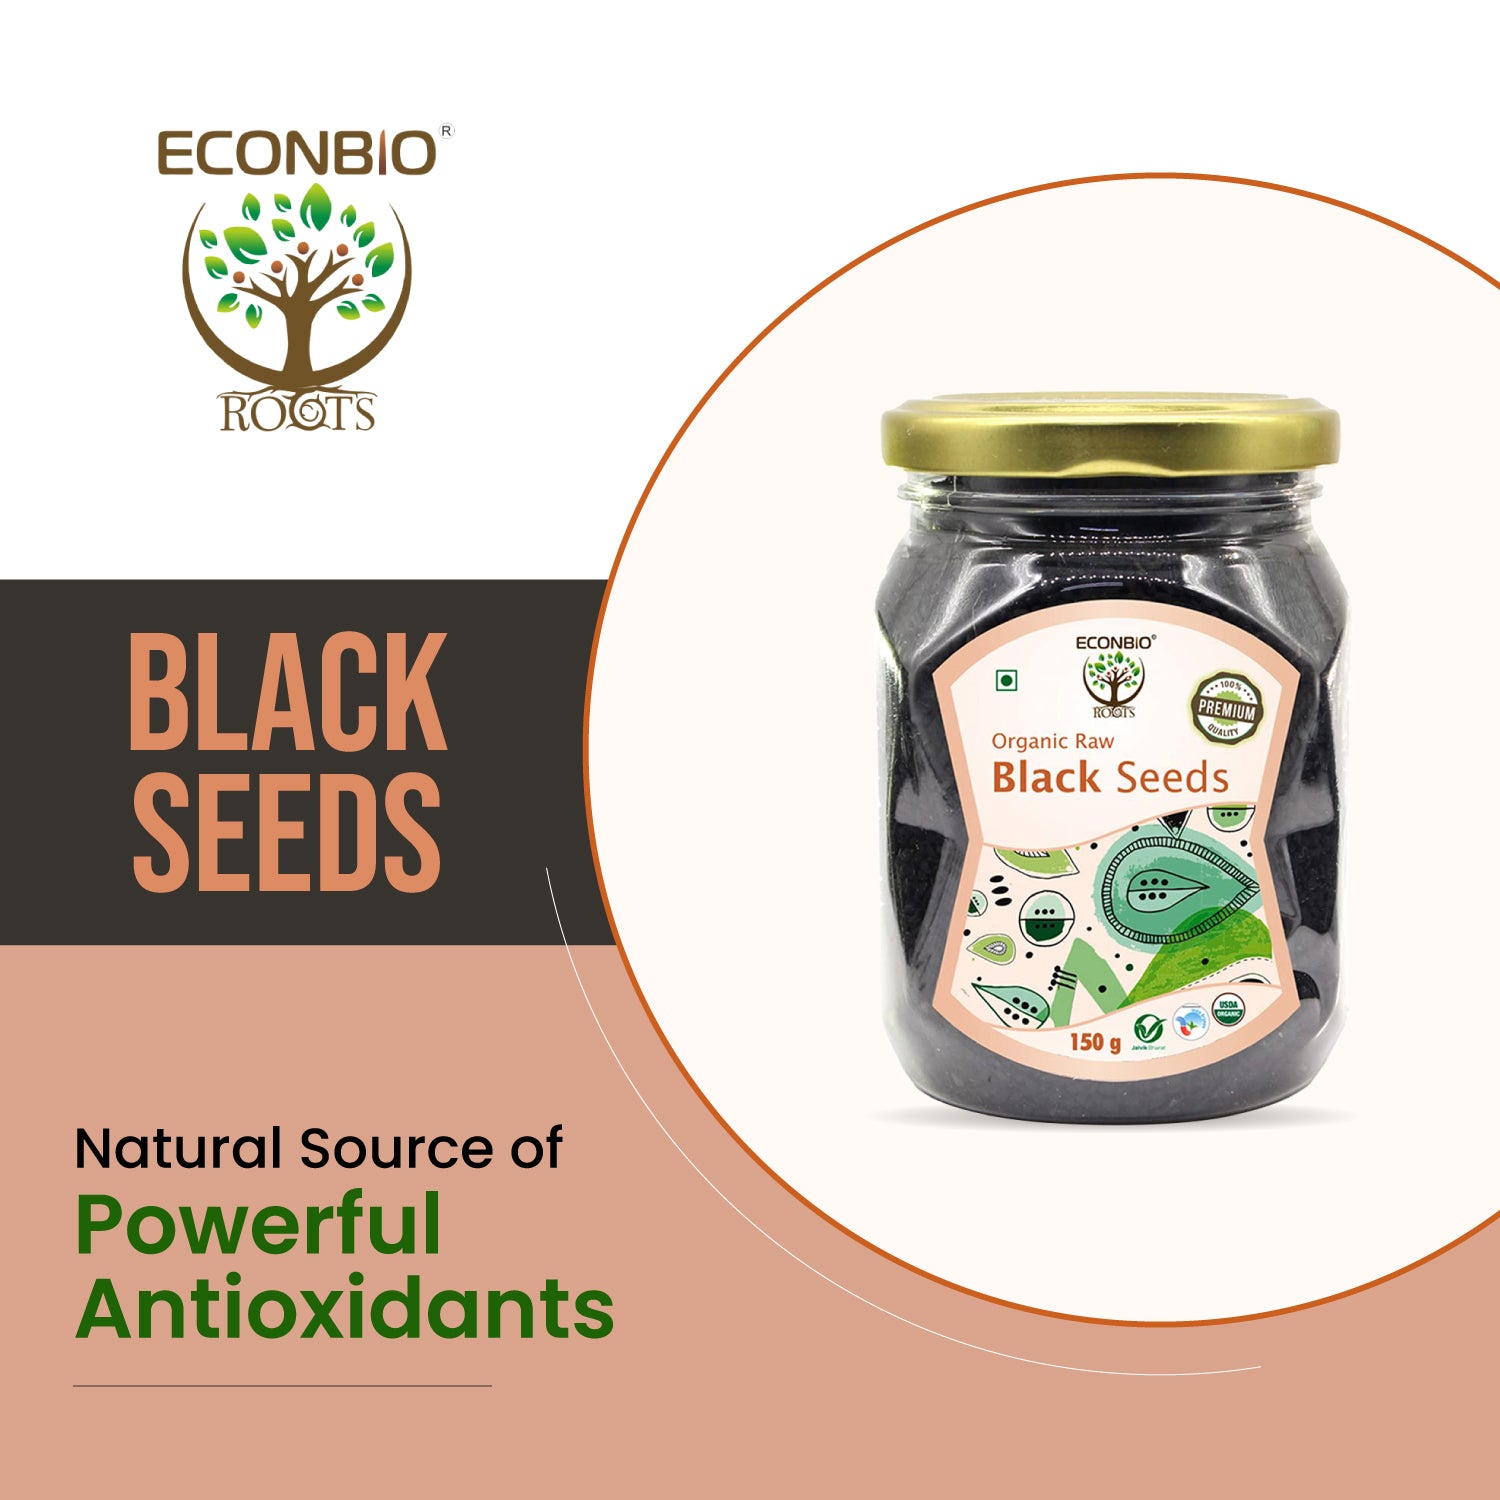 ECONBIO ROOTS Certified 100% Organic Raw Black Seeds 150g (Pack of 2)